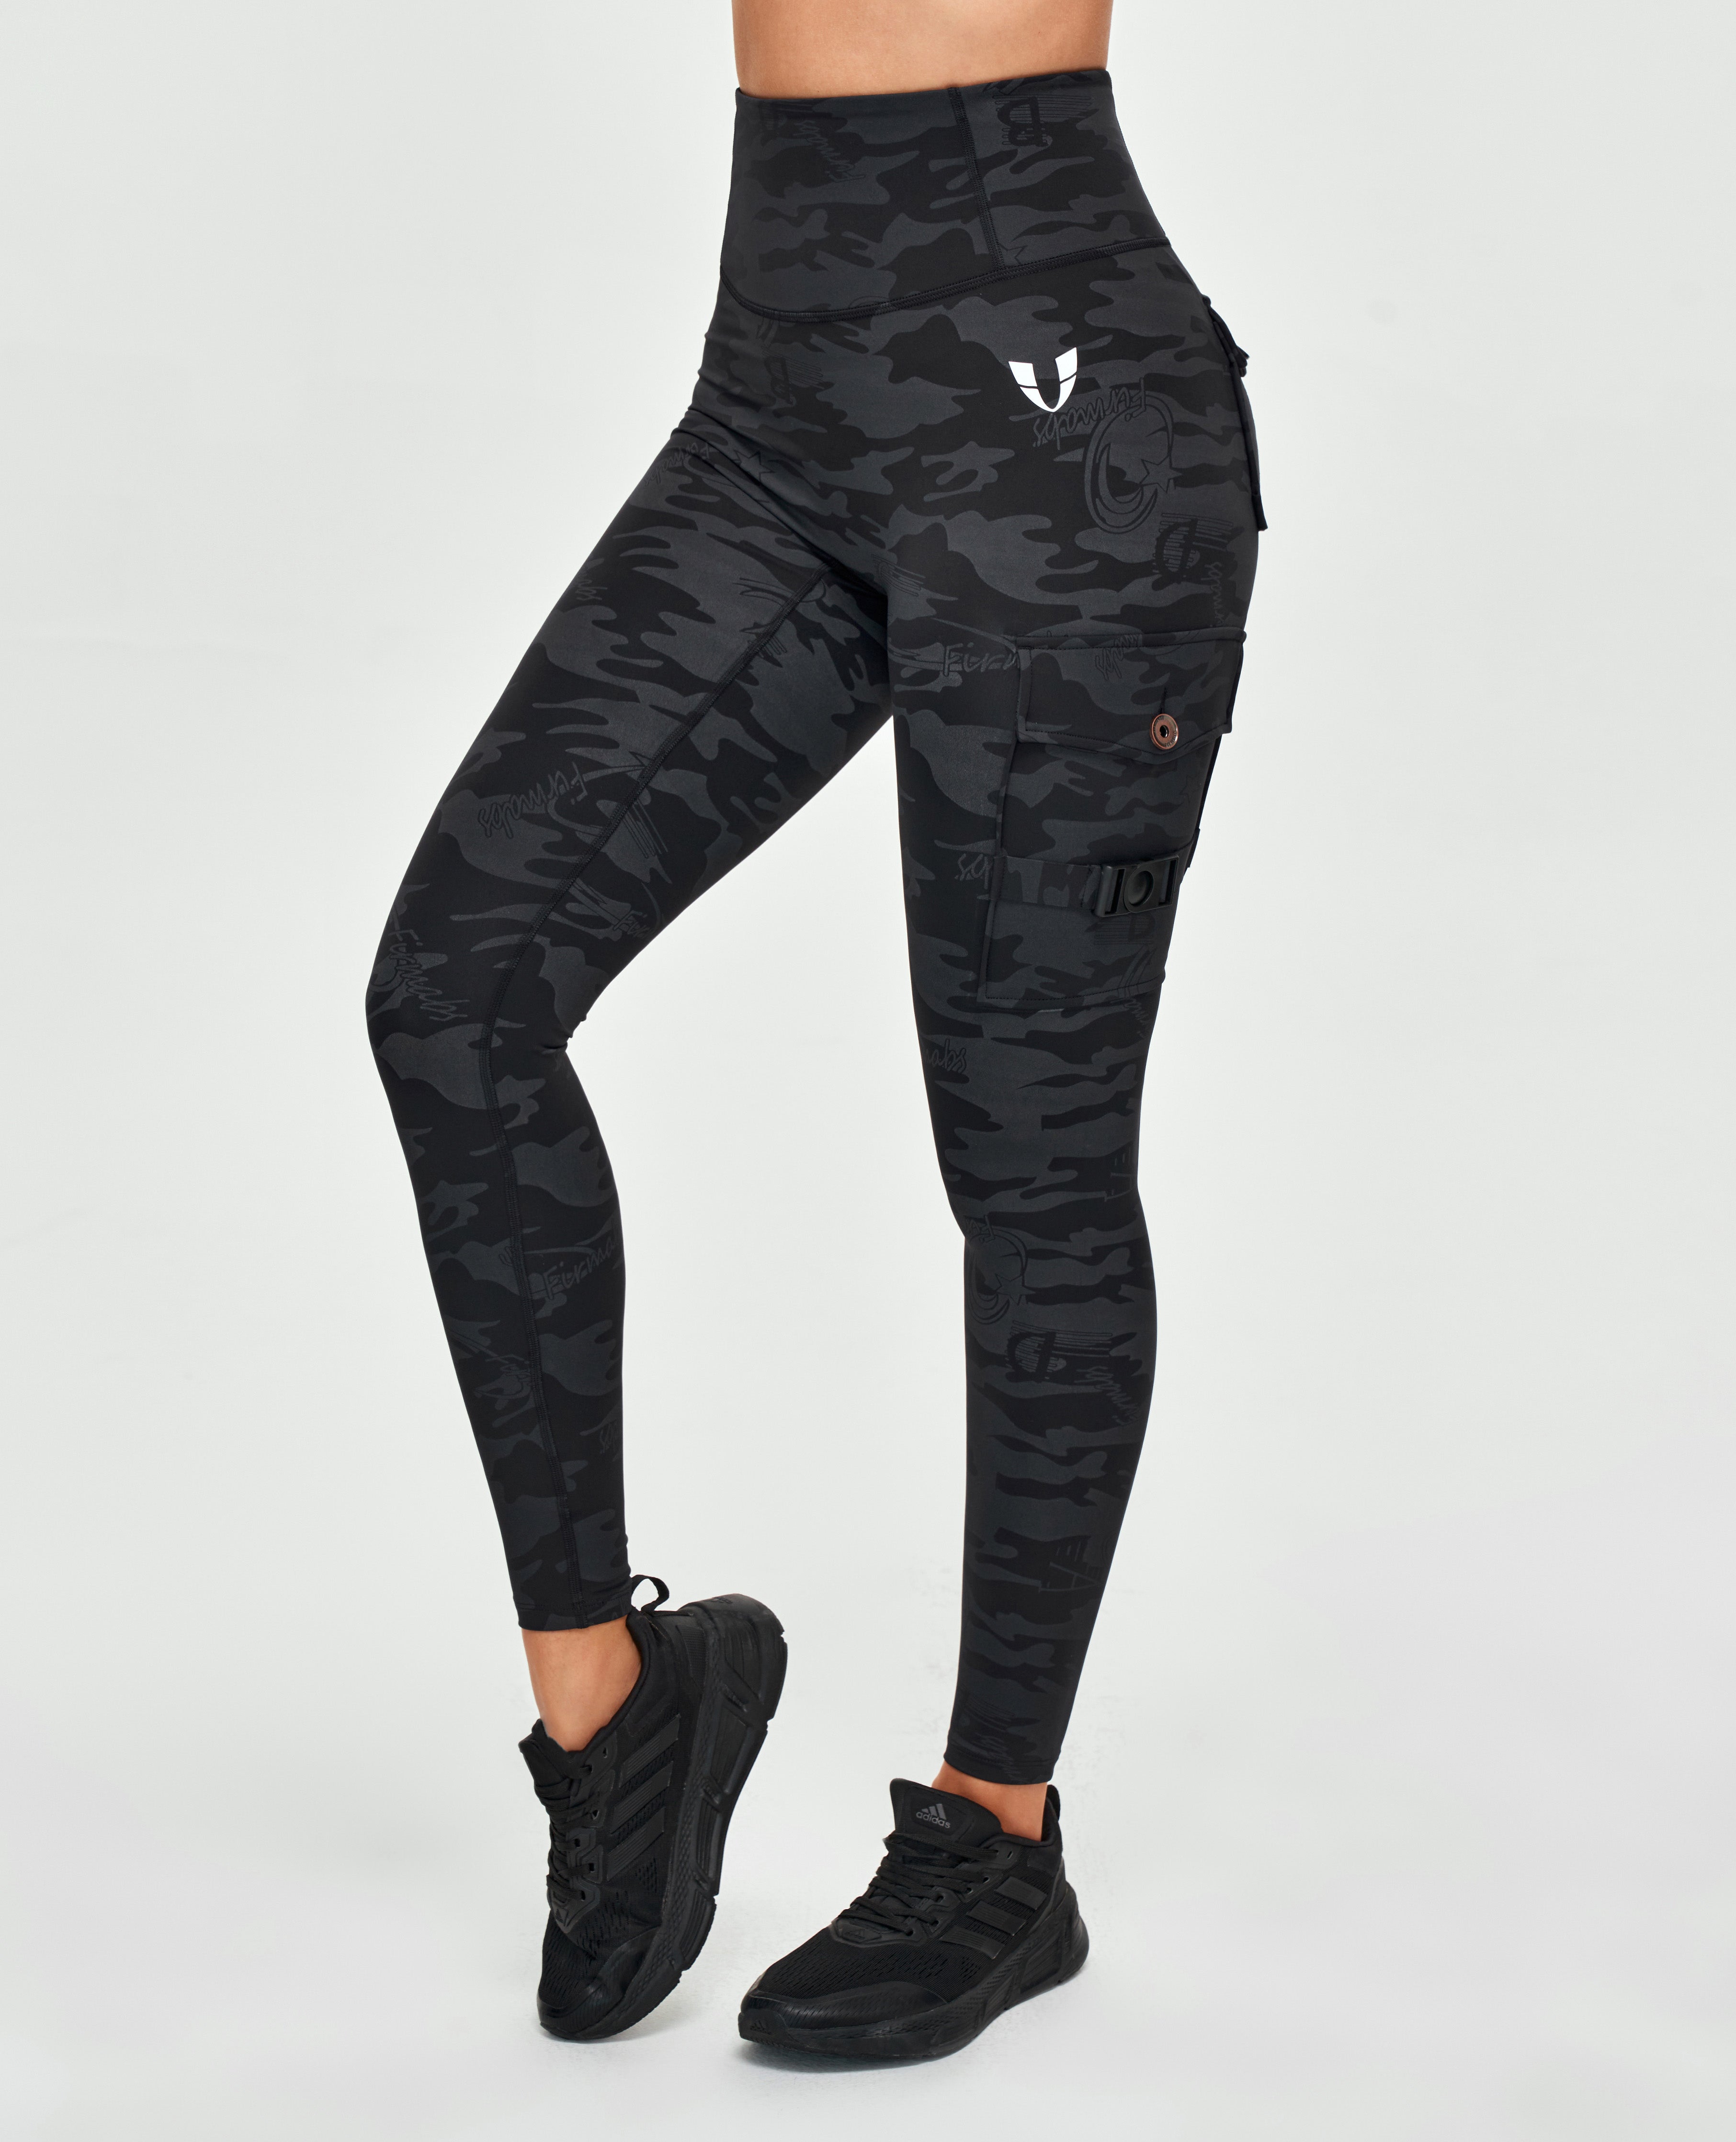 Camo Workout Clothes Collection from FIRM ABS